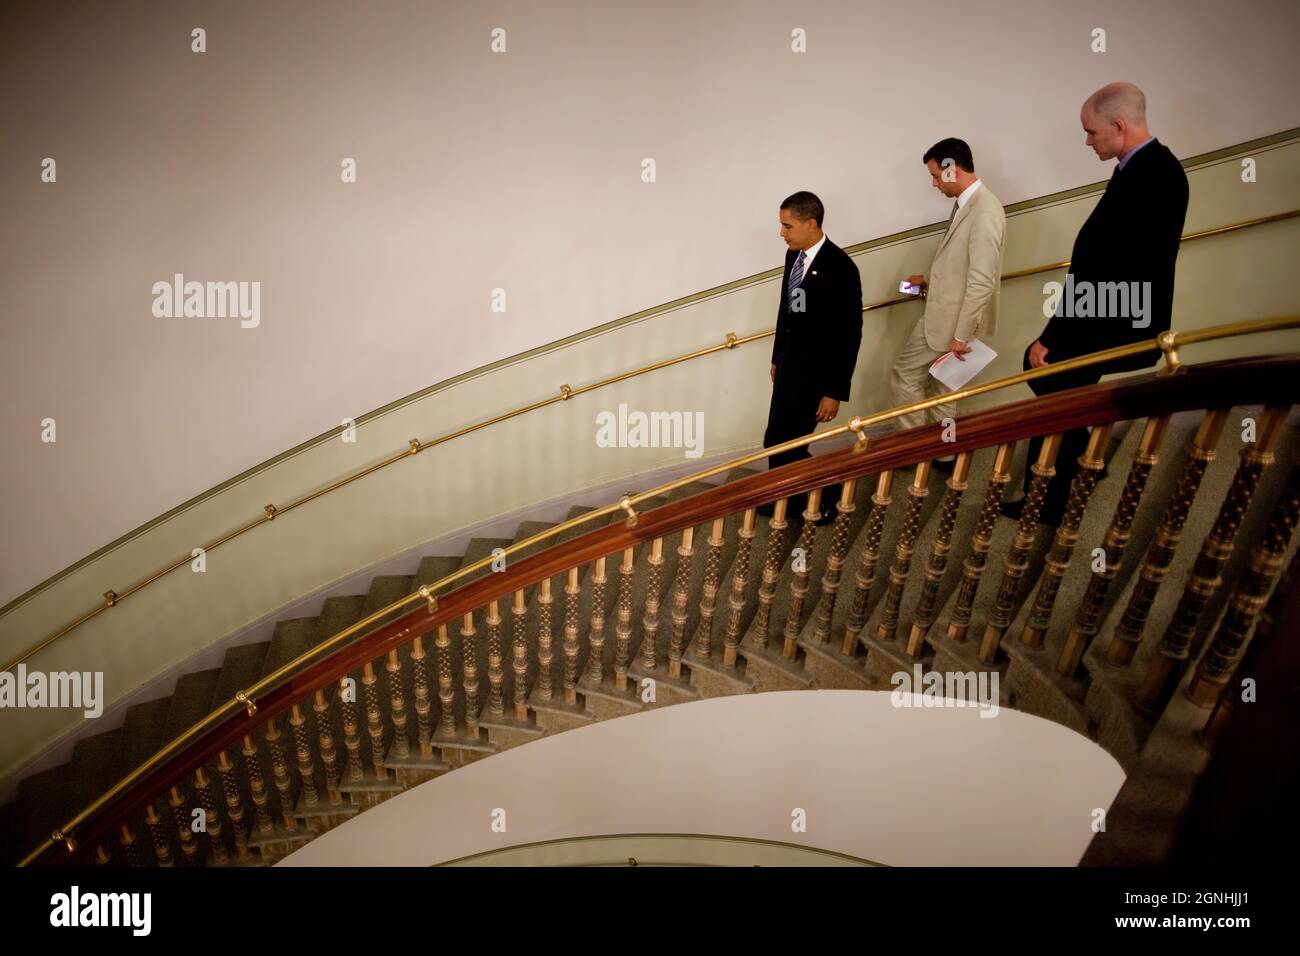 President Barack Obama walks down a spiral staircase with Deputy Director of Oval Office Operations Brian Mosteller after taping his weekly address in the Eisenhower Executive Office Building in Washington, July 24, 2009.  (Official White House Photo by Chuck Kennedy)  This official White House photograph is being made available for publication by news organizations and/or for personal use printing by the subject(s) of the photograph. The photograph may not be manipulated in any way or used in materials, advertisements, products, or promotions that in any way suggest approval or endorsement of Stock Photo